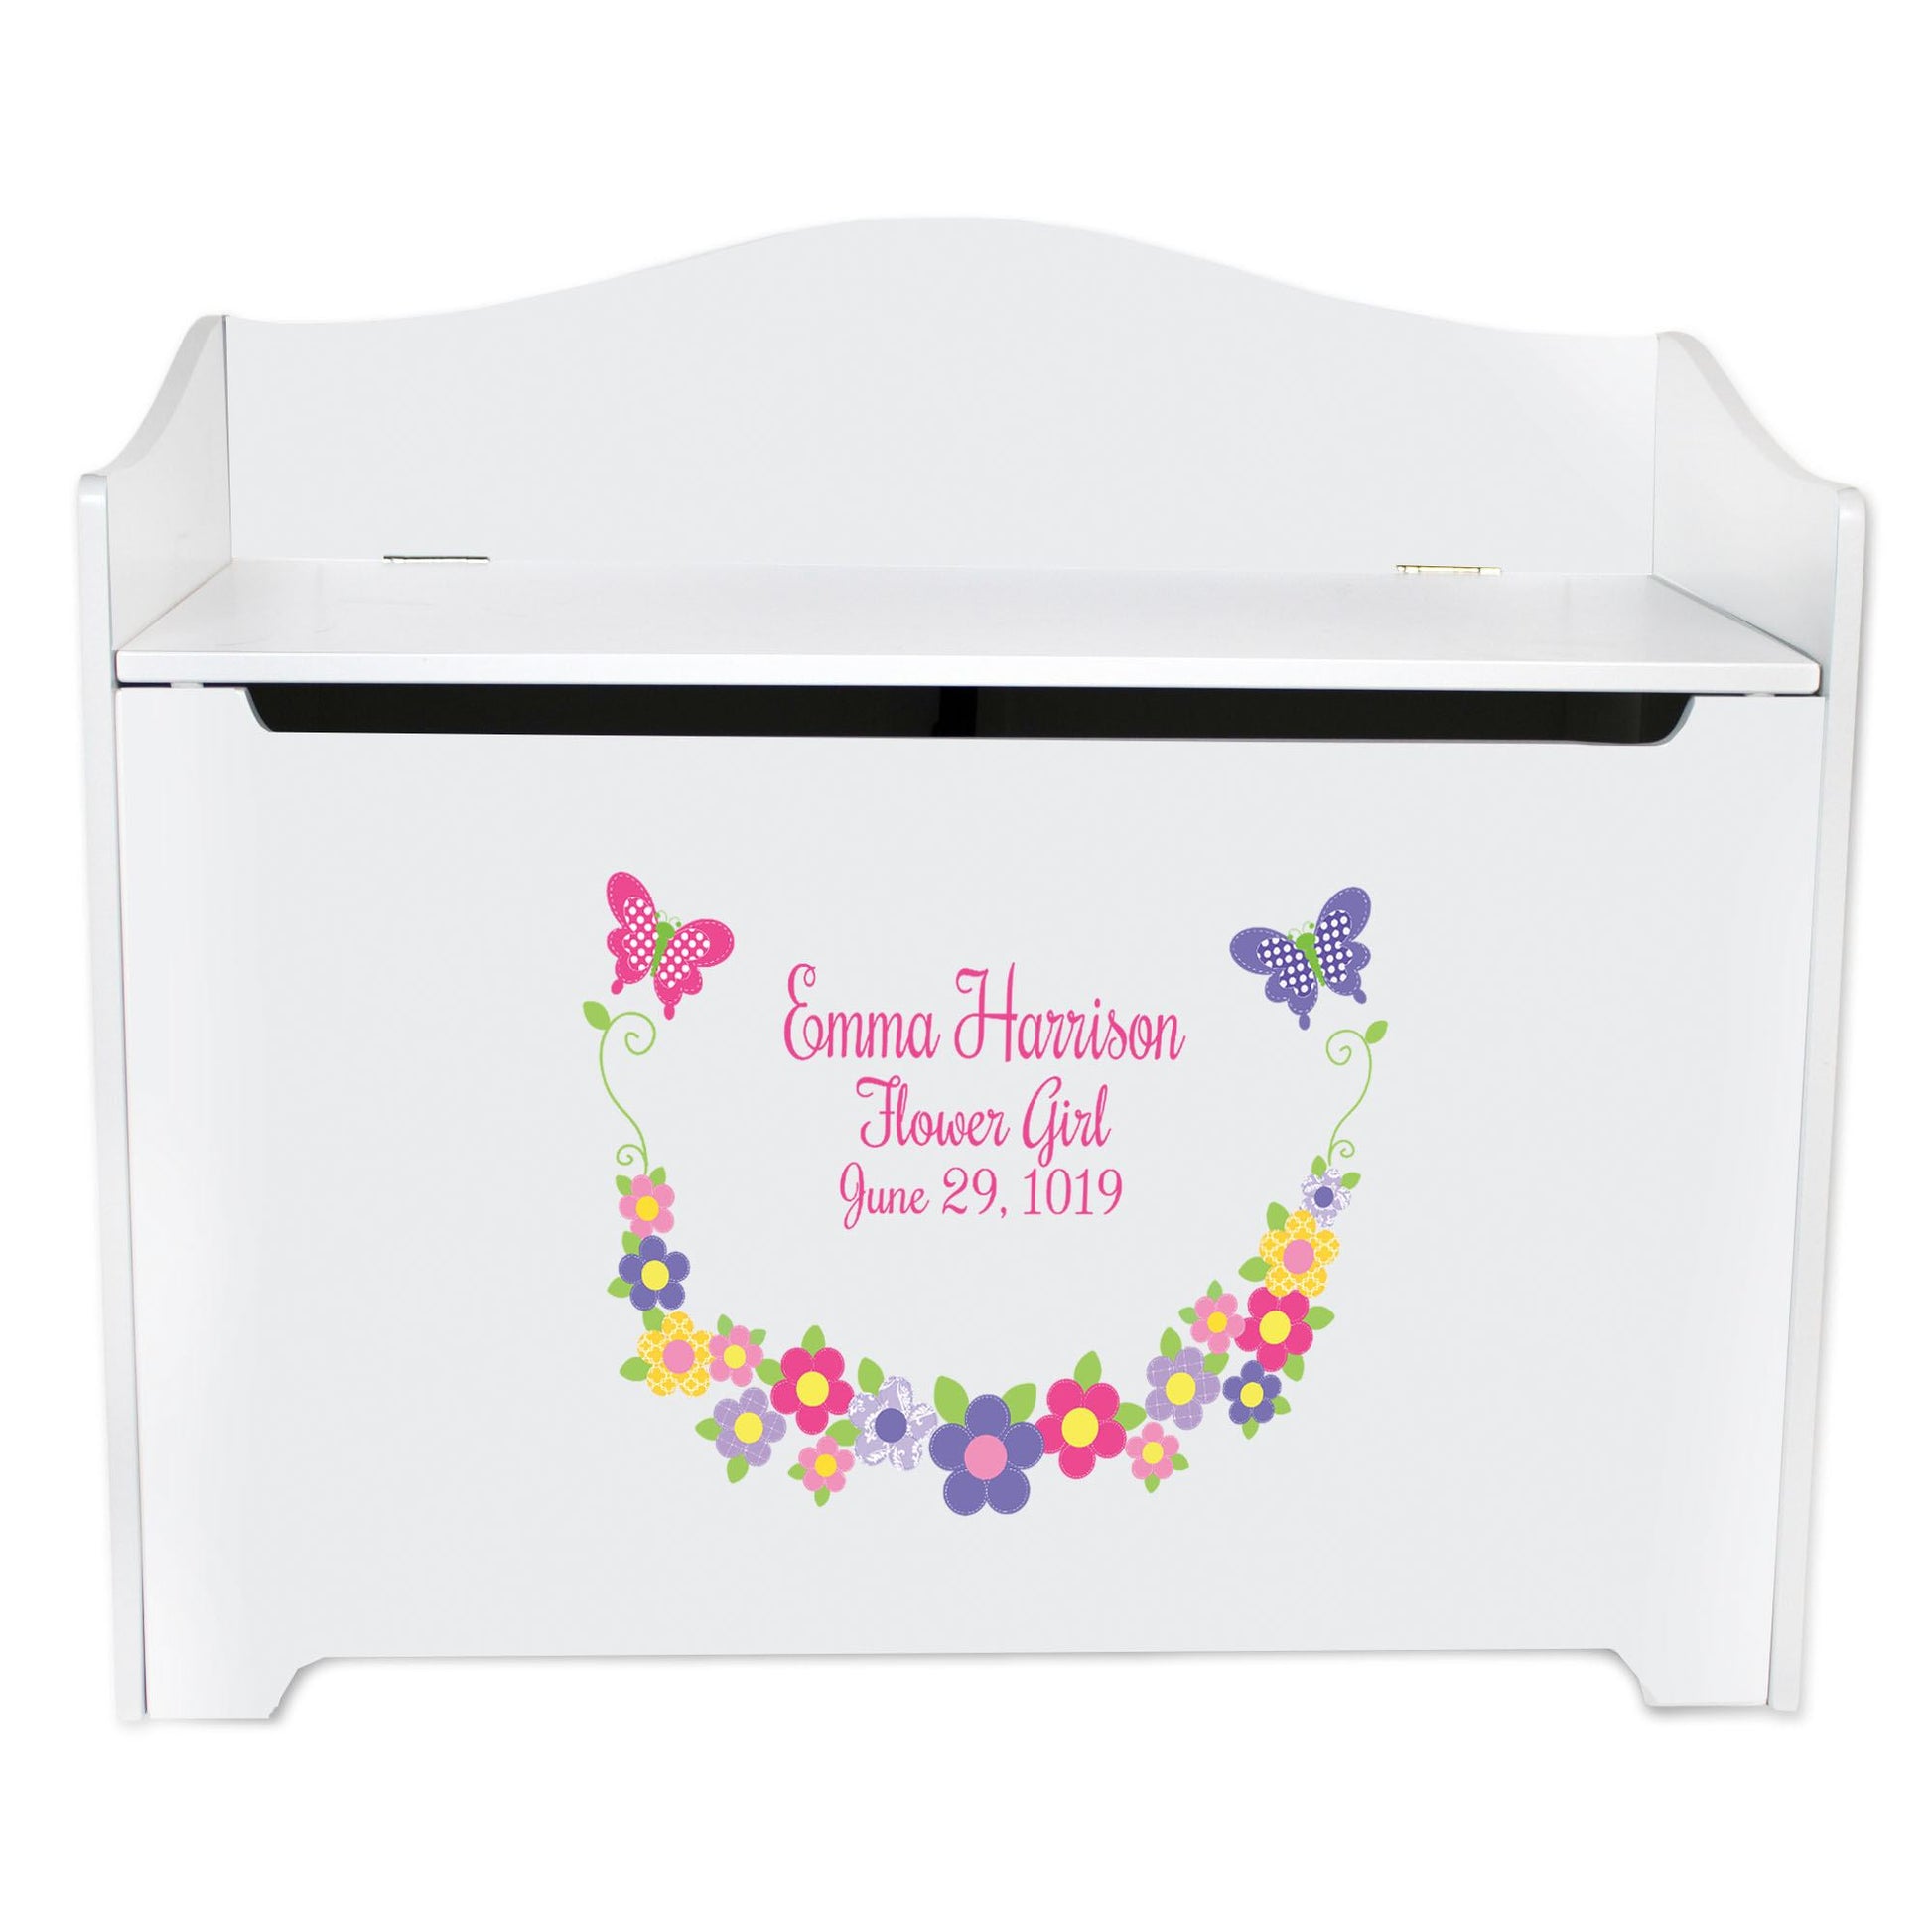 White Wooden Toy Box Bench with Bright Butterflies Garland design